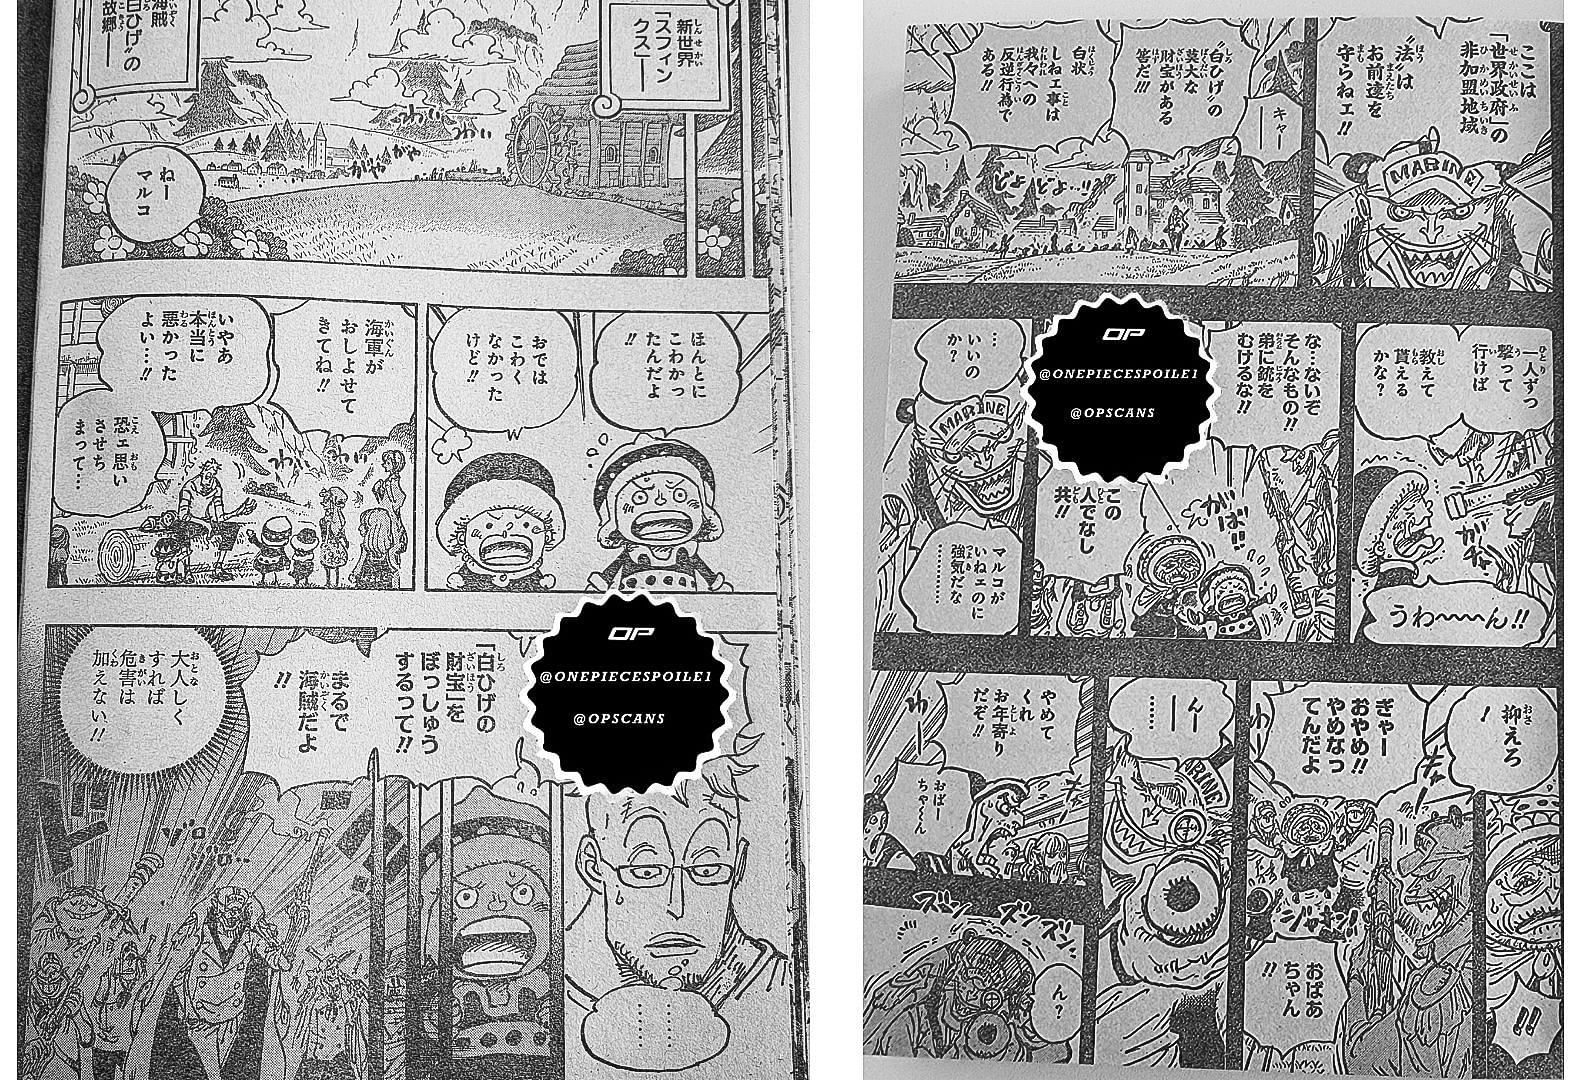 Marco is seen talking to a kid as Marines appear in the panel (Image via Eiichiro Oda)